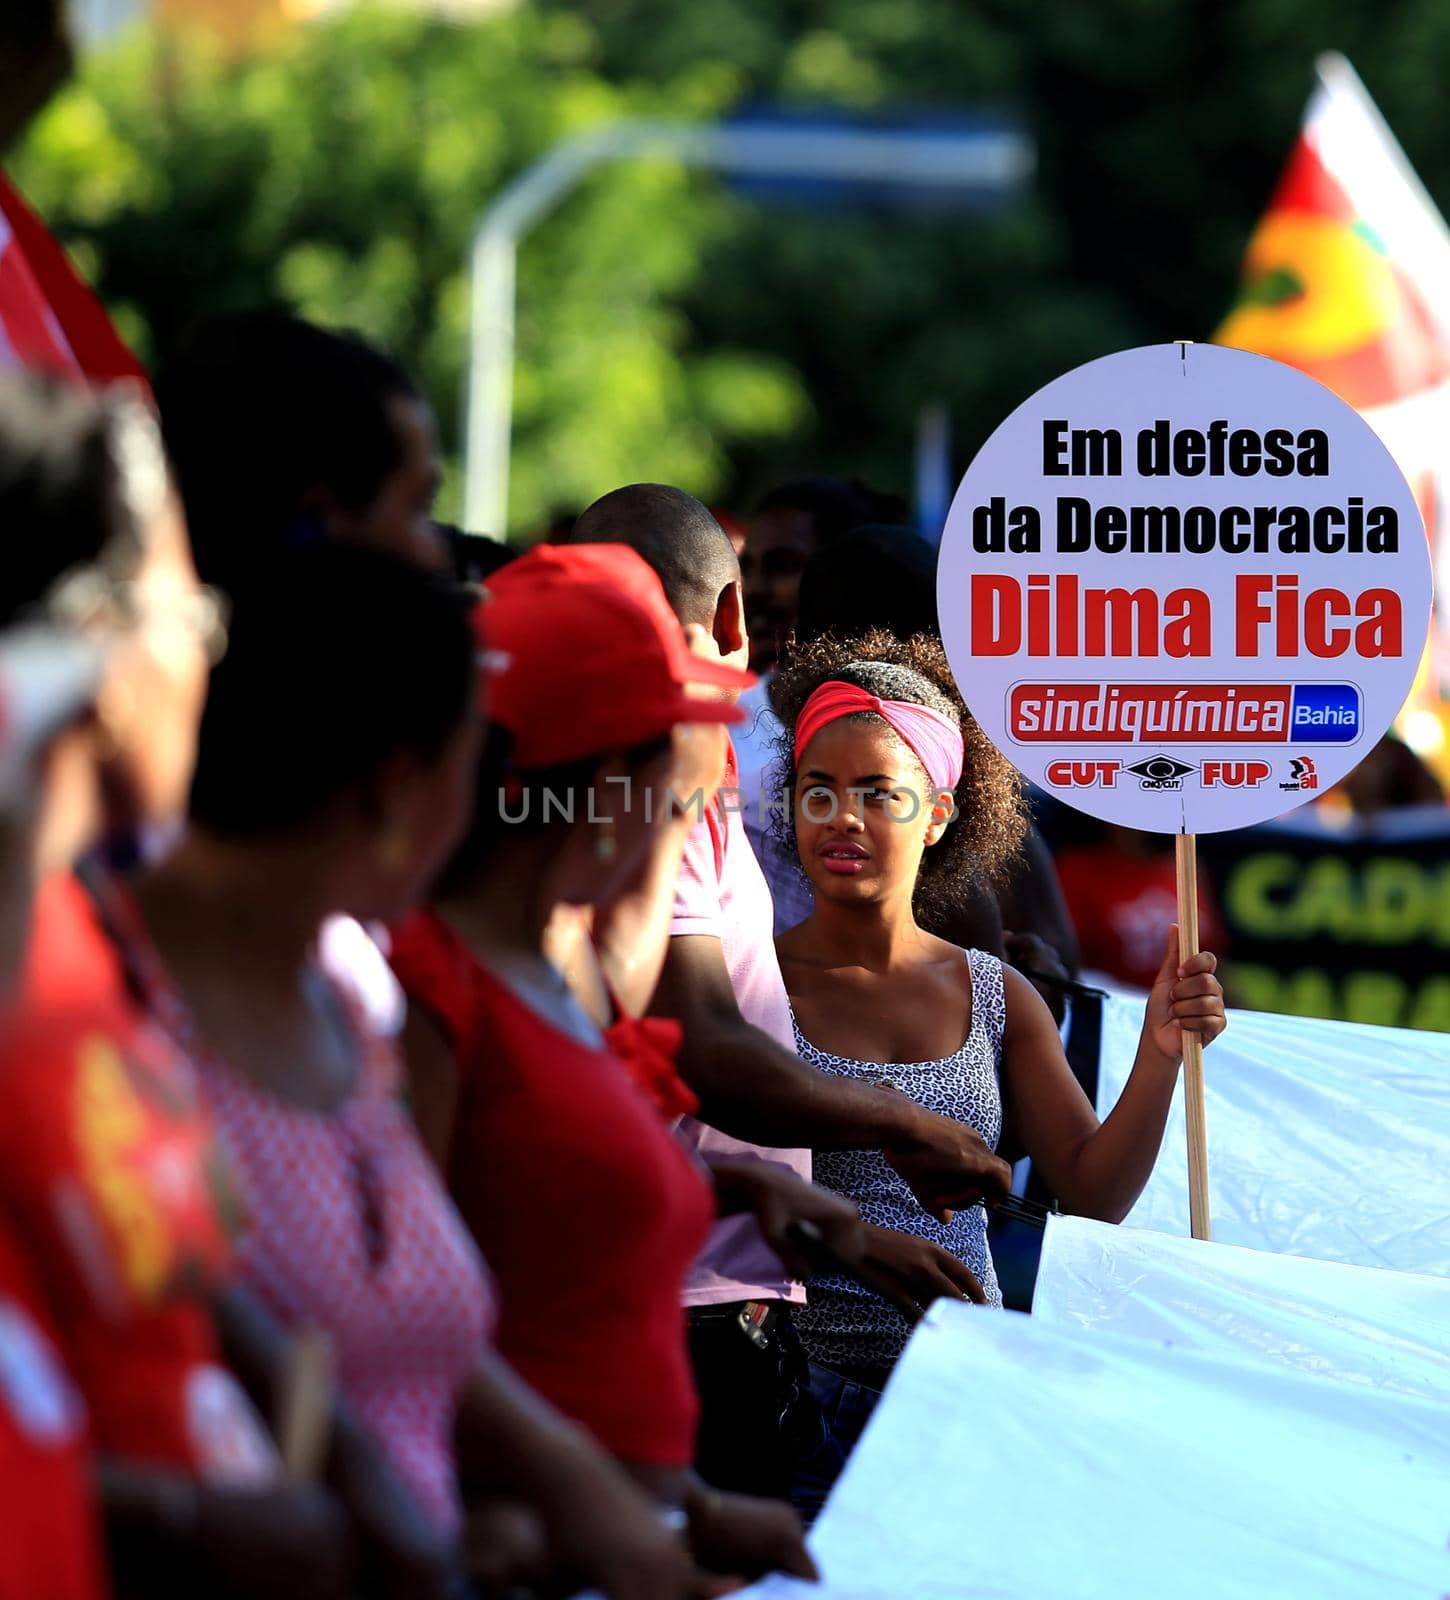 salvador, bahia, brazil - dec. 16, 2015: members of the trade union centrals, political parties and social movements mobilize in favor of president Dilma Rousseff and asking Eduardo Cunha to leave the presidency of the Chamber of Deputies.


